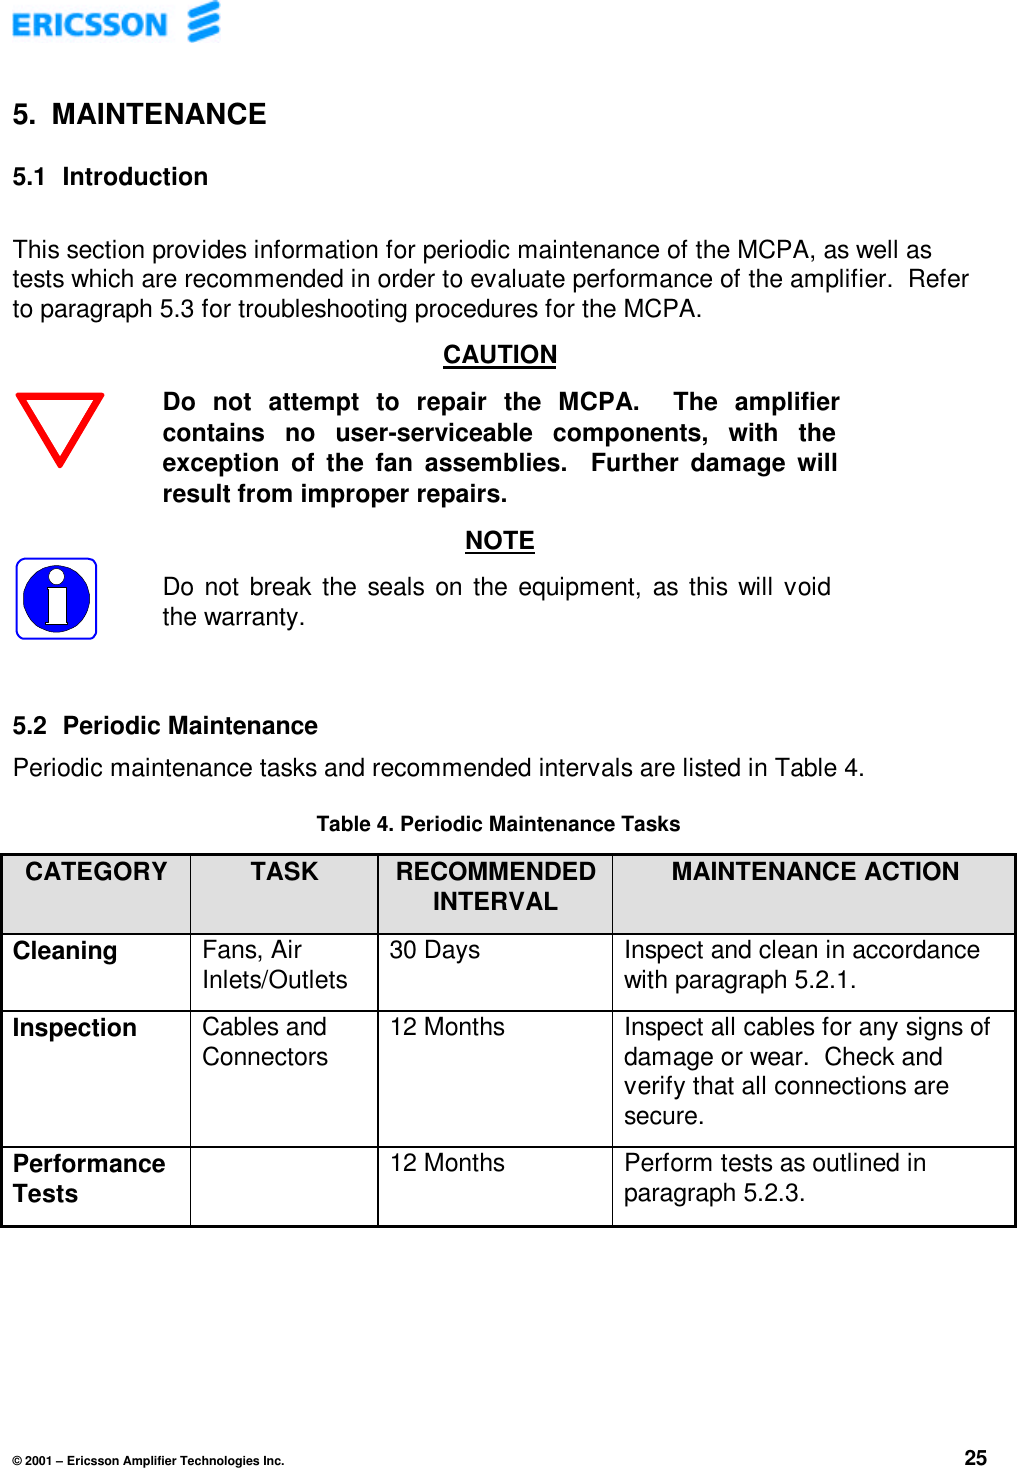 © 2001 – Ericsson Amplifier Technologies Inc. 255. MAINTENANCE5.1  IntroductionThis section provides information for periodic maintenance of the MCPA, as well astests which are recommended in order to evaluate performance of the amplifier.  Referto paragraph 5.3 for troubleshooting procedures for the MCPA.CAUTIONDo not attempt to repair the MCPA.  The amplifiercontains no user-serviceable components, with theexception of the fan assemblies.  Further damage willresult from improper repairs.NOTEDo not break the seals on the equipment, as this will voidthe warranty.5.2  Periodic MaintenancePeriodic maintenance tasks and recommended intervals are listed in Table 4.Table 4. Periodic Maintenance TasksCATEGORY TASK RECOMMENDEDINTERVAL MAINTENANCE ACTIONCleaning Fans, AirInlets/Outlets 30 Days Inspect and clean in accordancewith paragraph 5.2.1.Inspection Cables andConnectors 12 Months Inspect all cables for any signs ofdamage or wear.  Check andverify that all connections aresecure.PerformanceTests 12 Months Perform tests as outlined inparagraph 5.2.3.